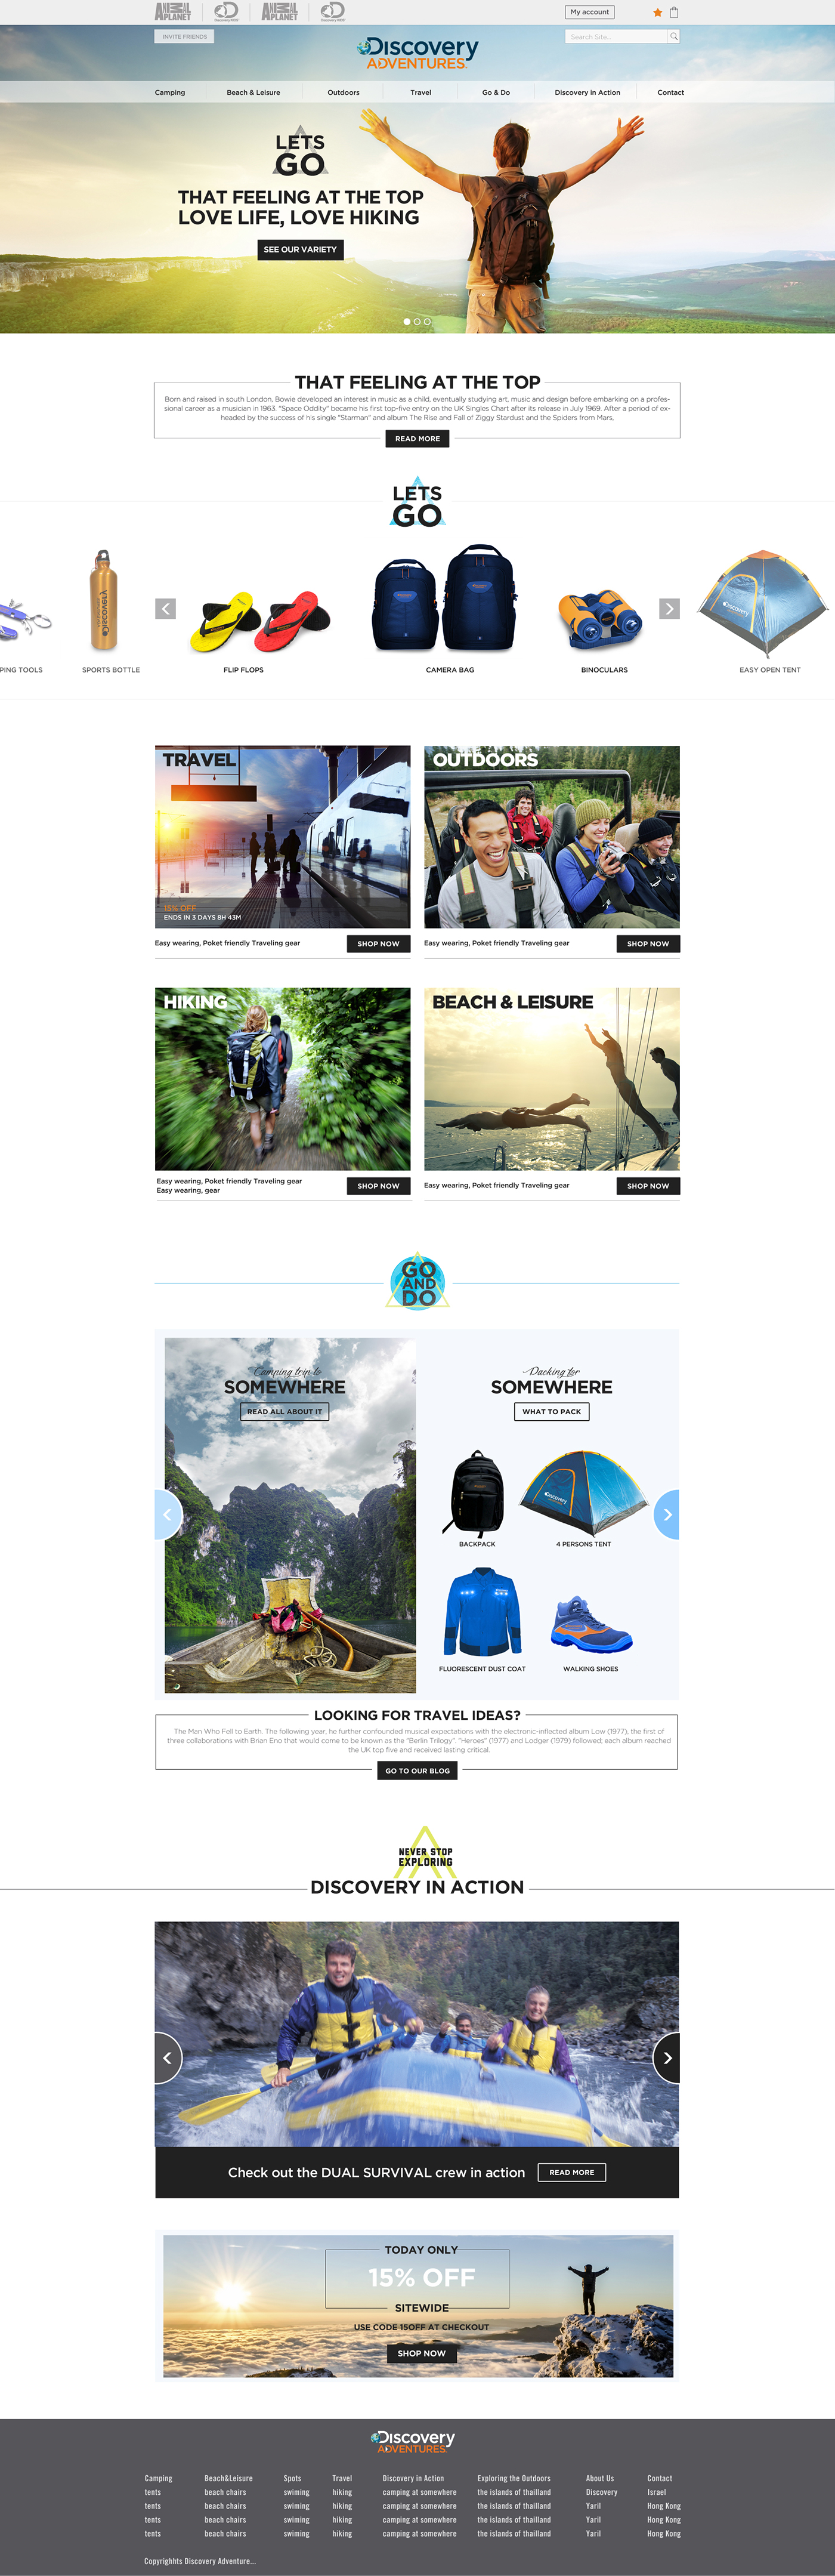 Website Design Website Travel Gear discovery adventures Shopping camping